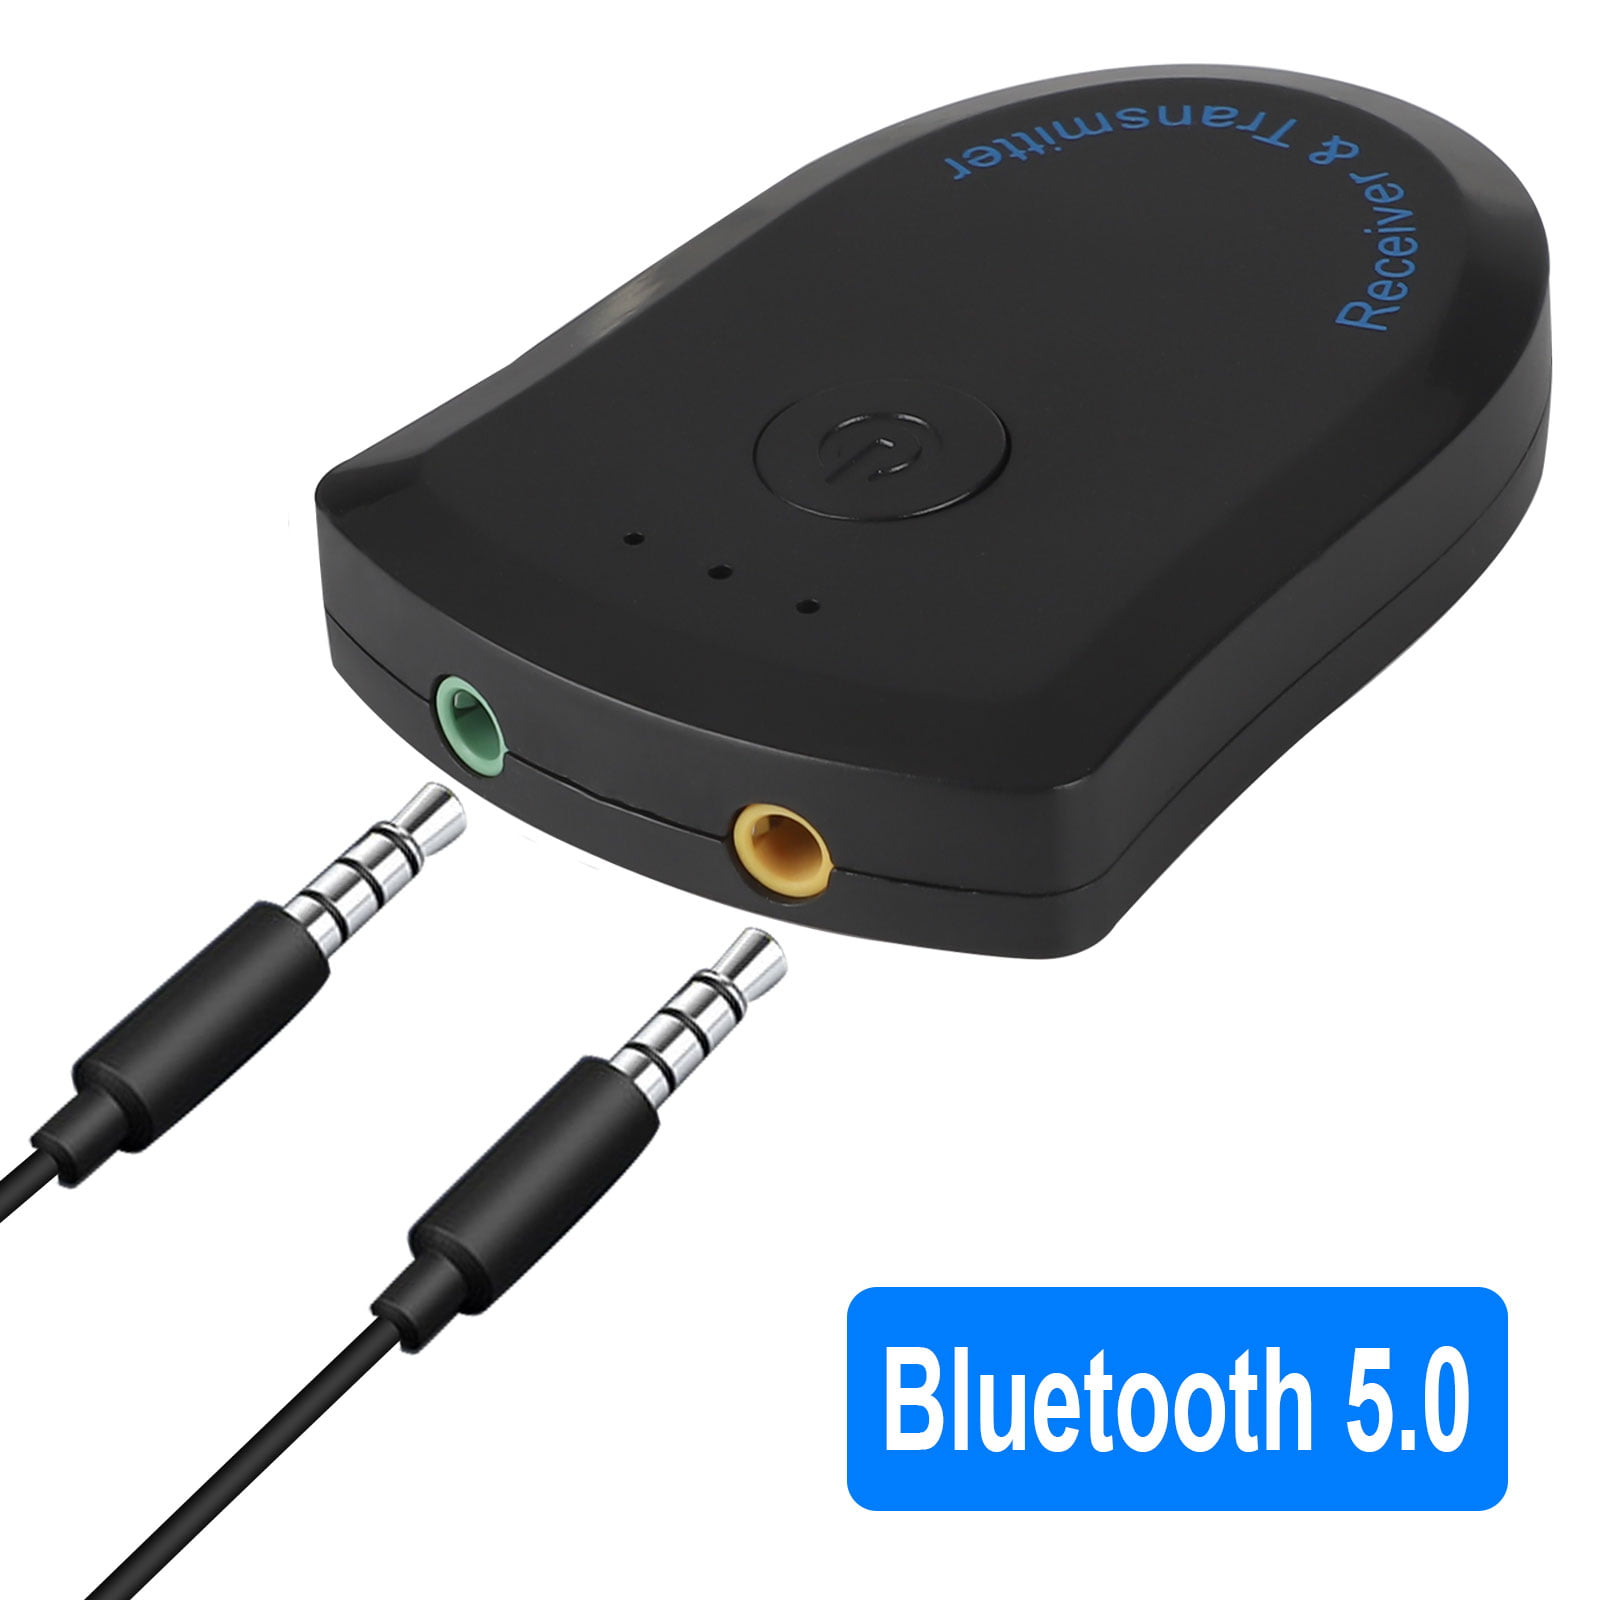 Portable Bluetooth 5.0 Transmitter Receiver, 2in1